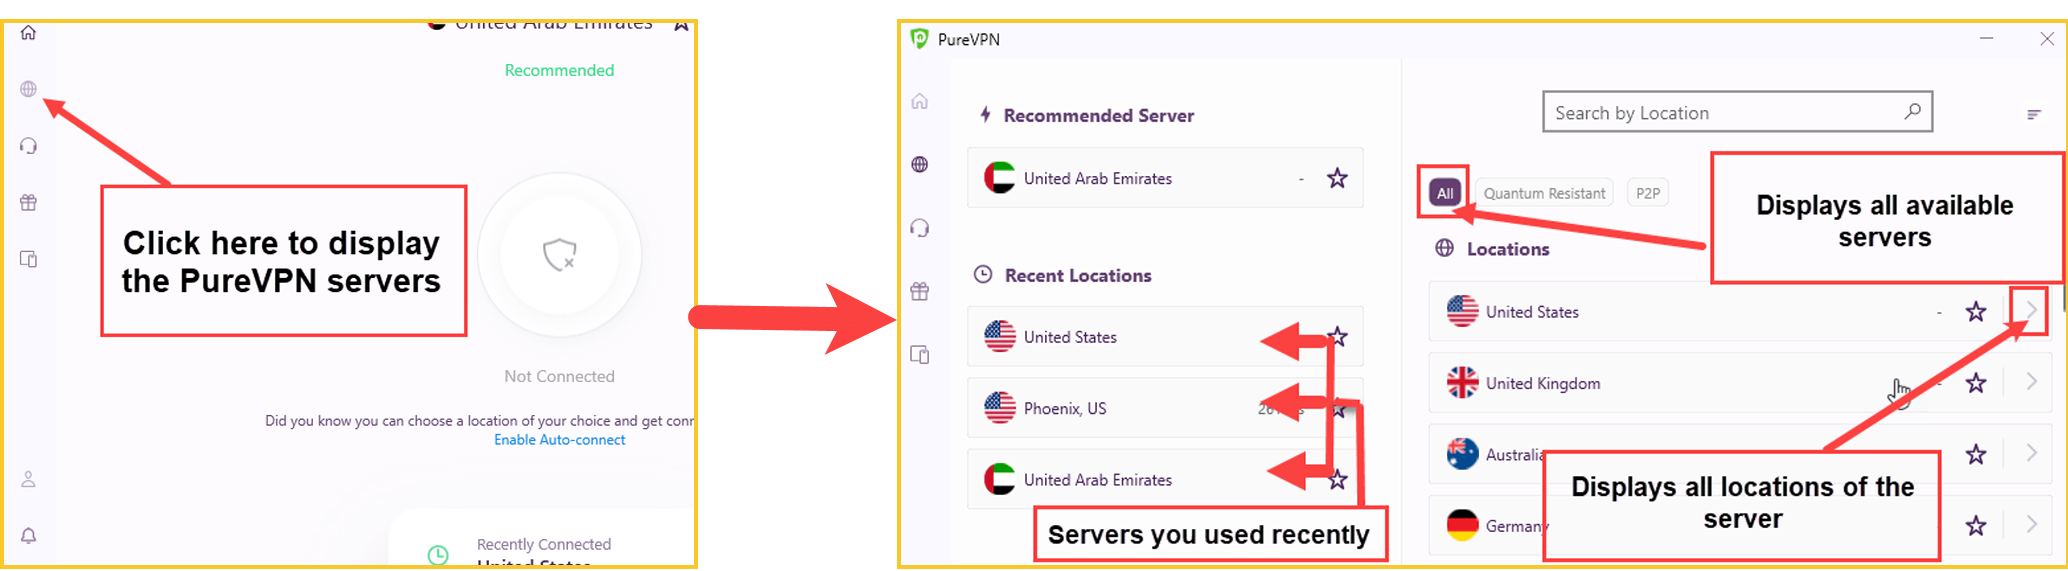 purevpn-server-locations-interface-in-France